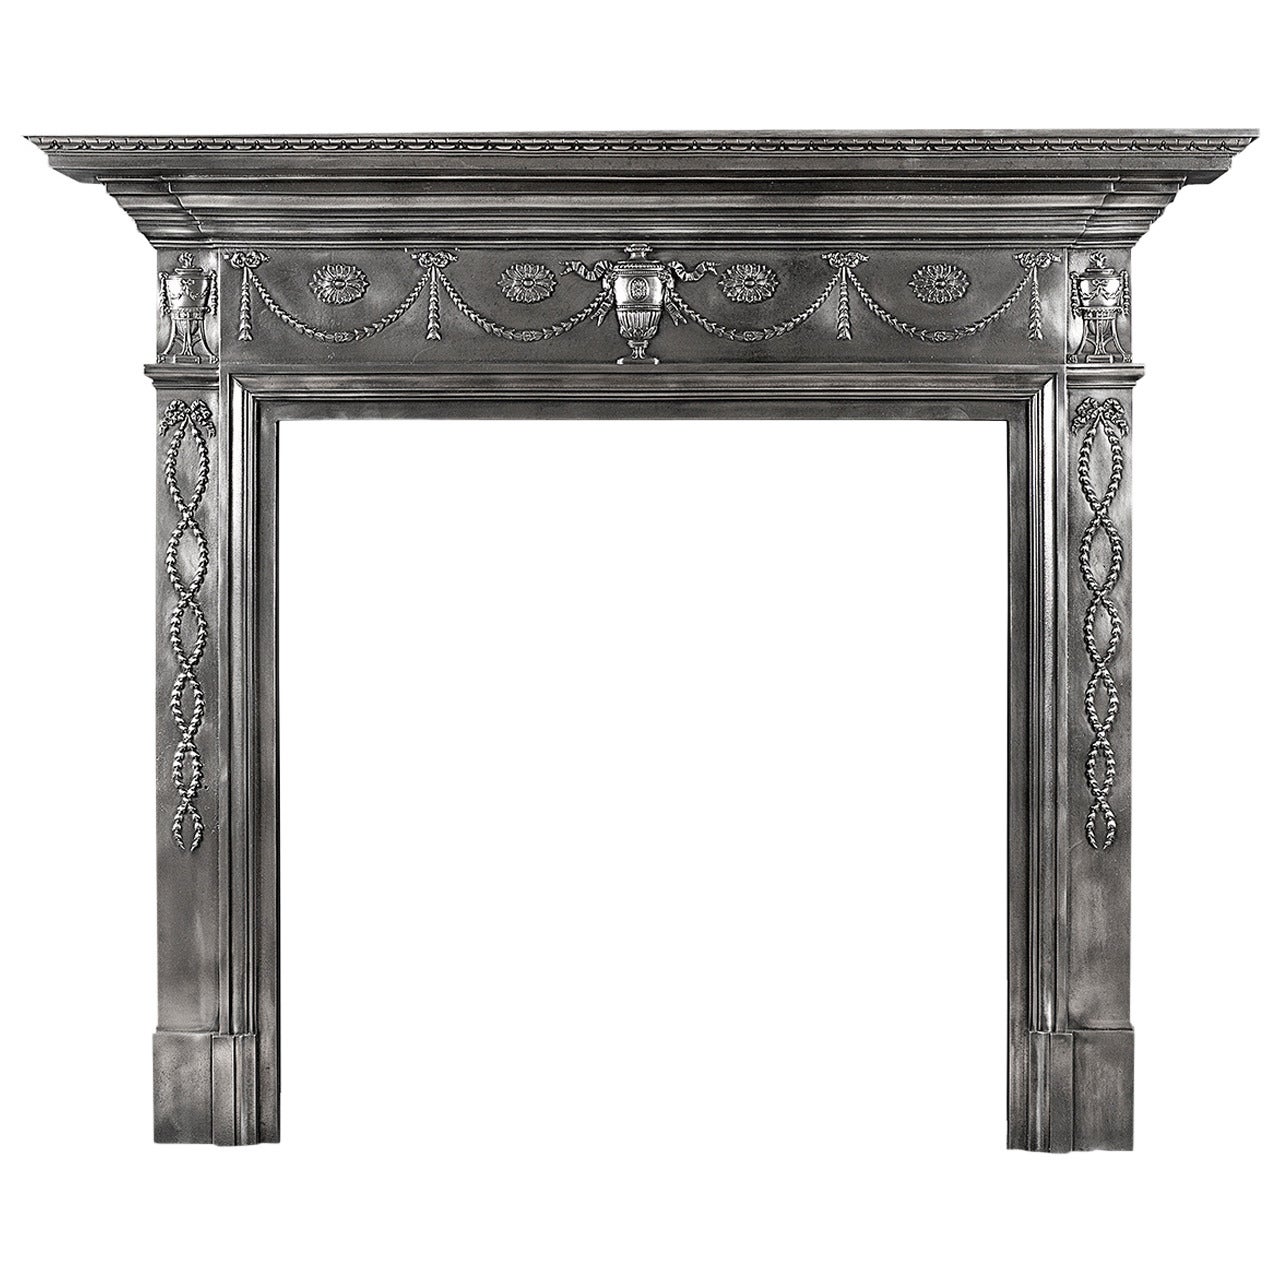 A 19th century polished cast iron fireplace mantel in the Adam style For Sale